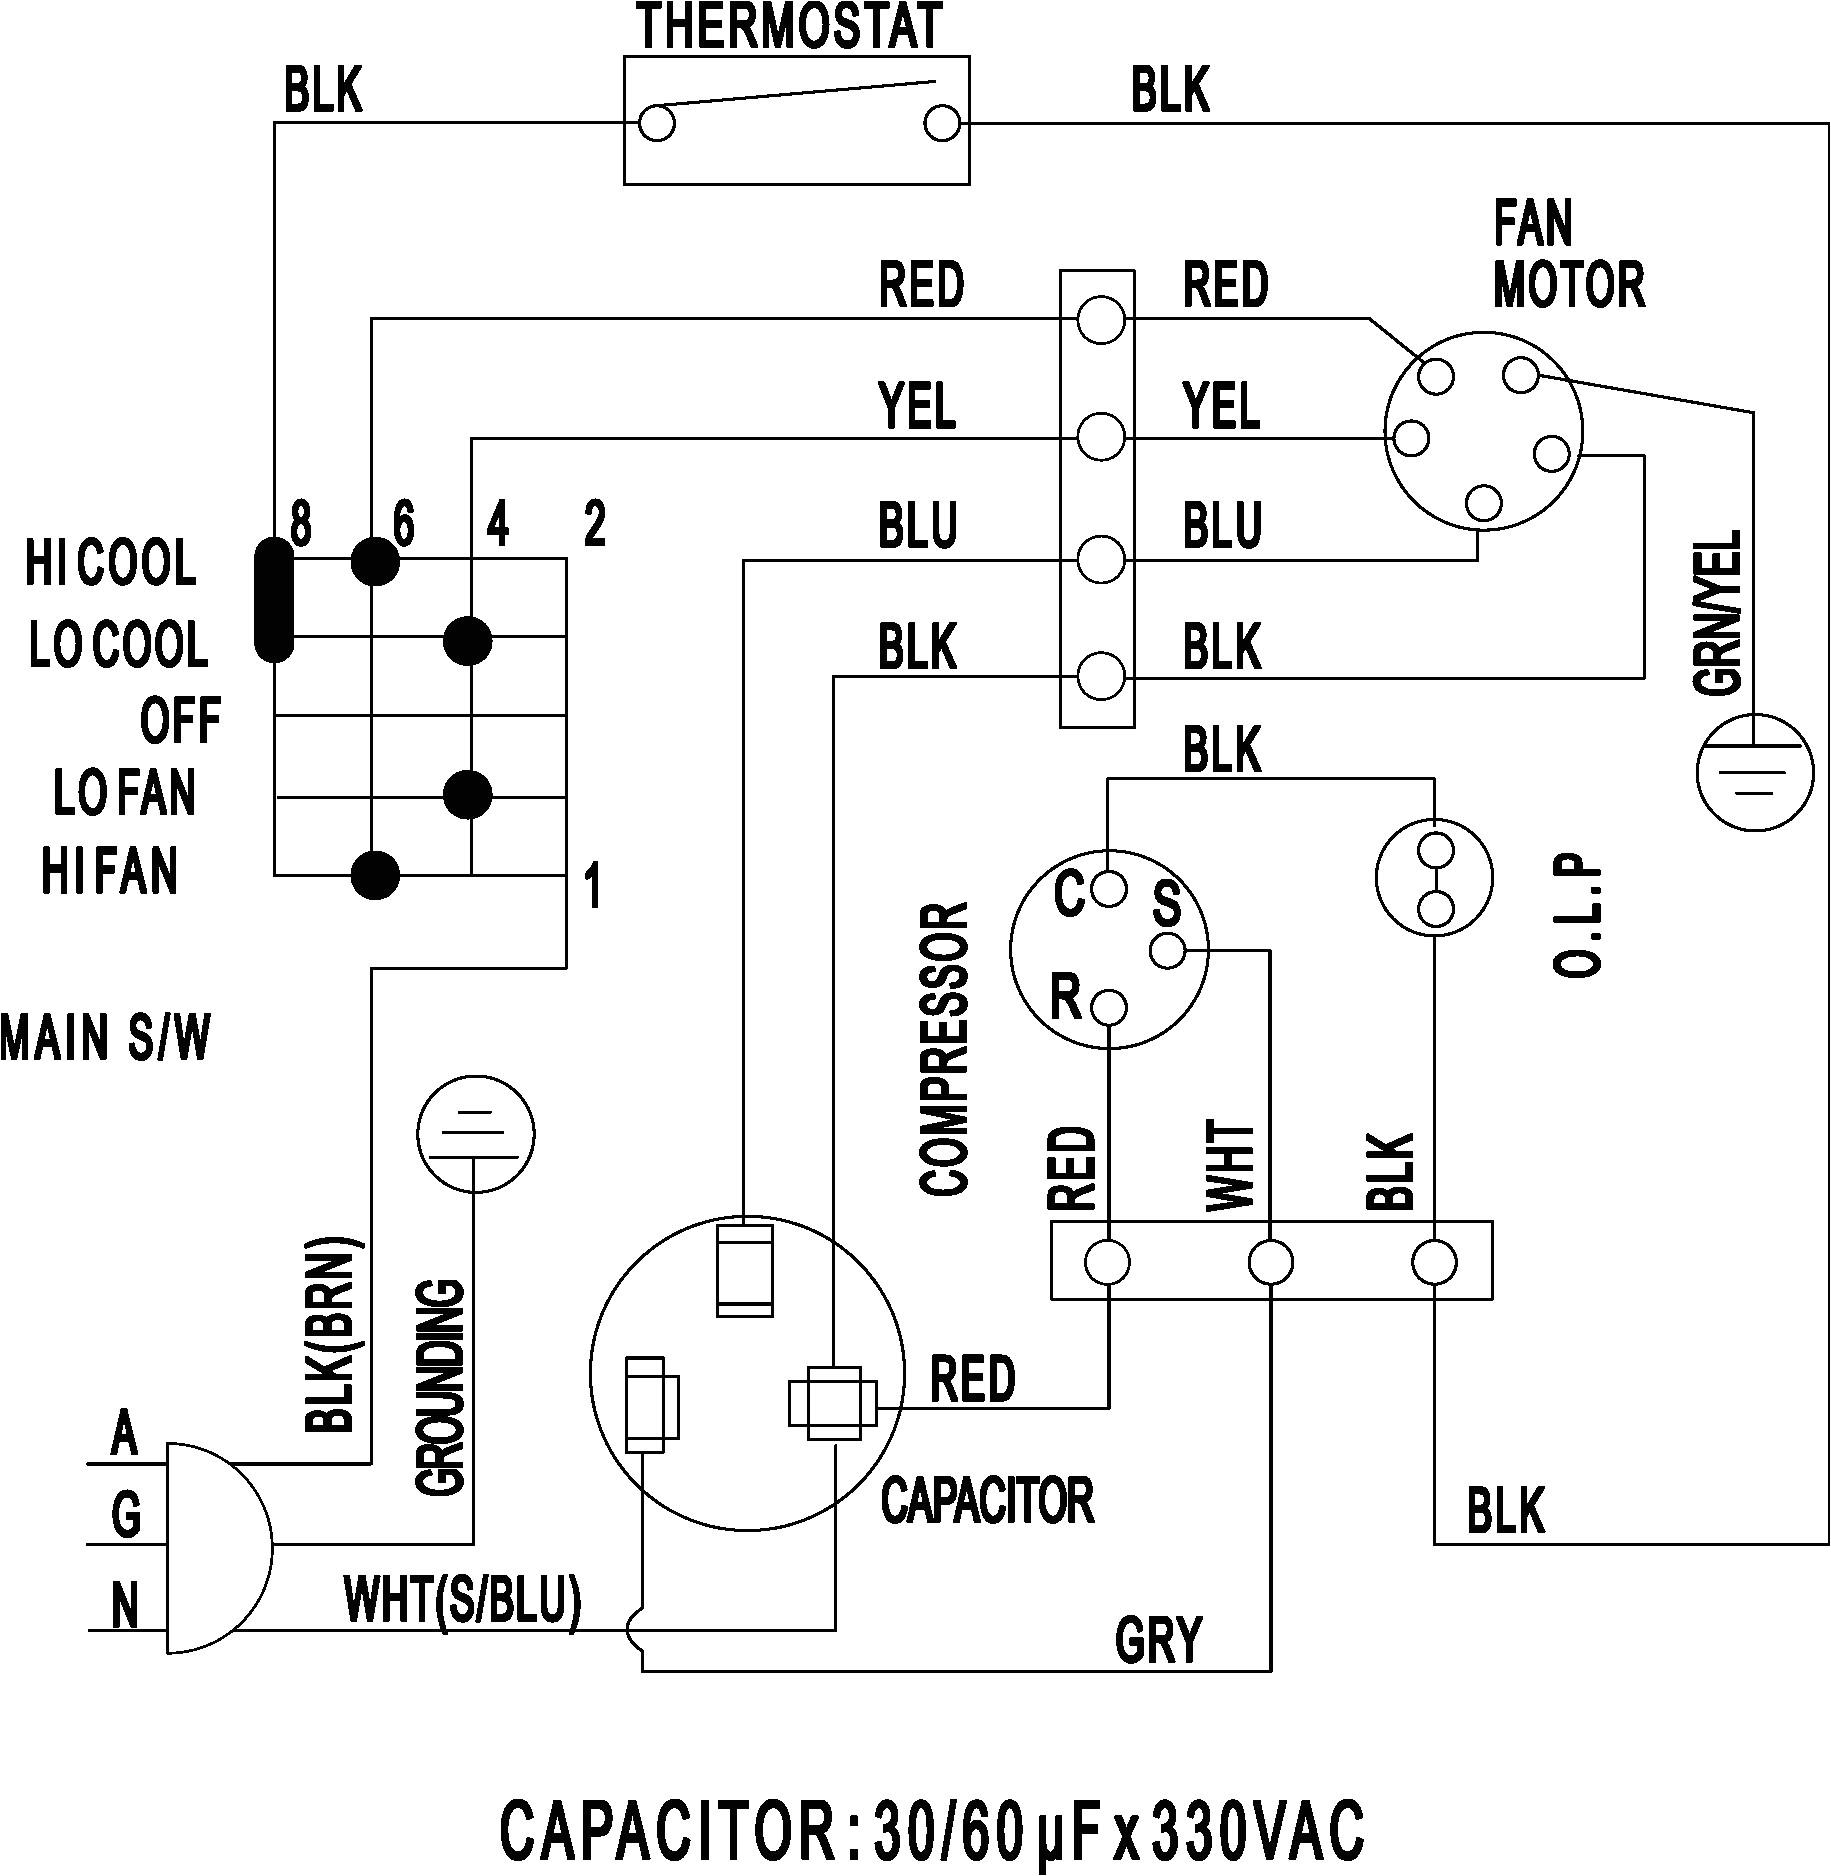 york air conditioner wiring diagram copy of carrier within split ac in diagrams conditioners jpg